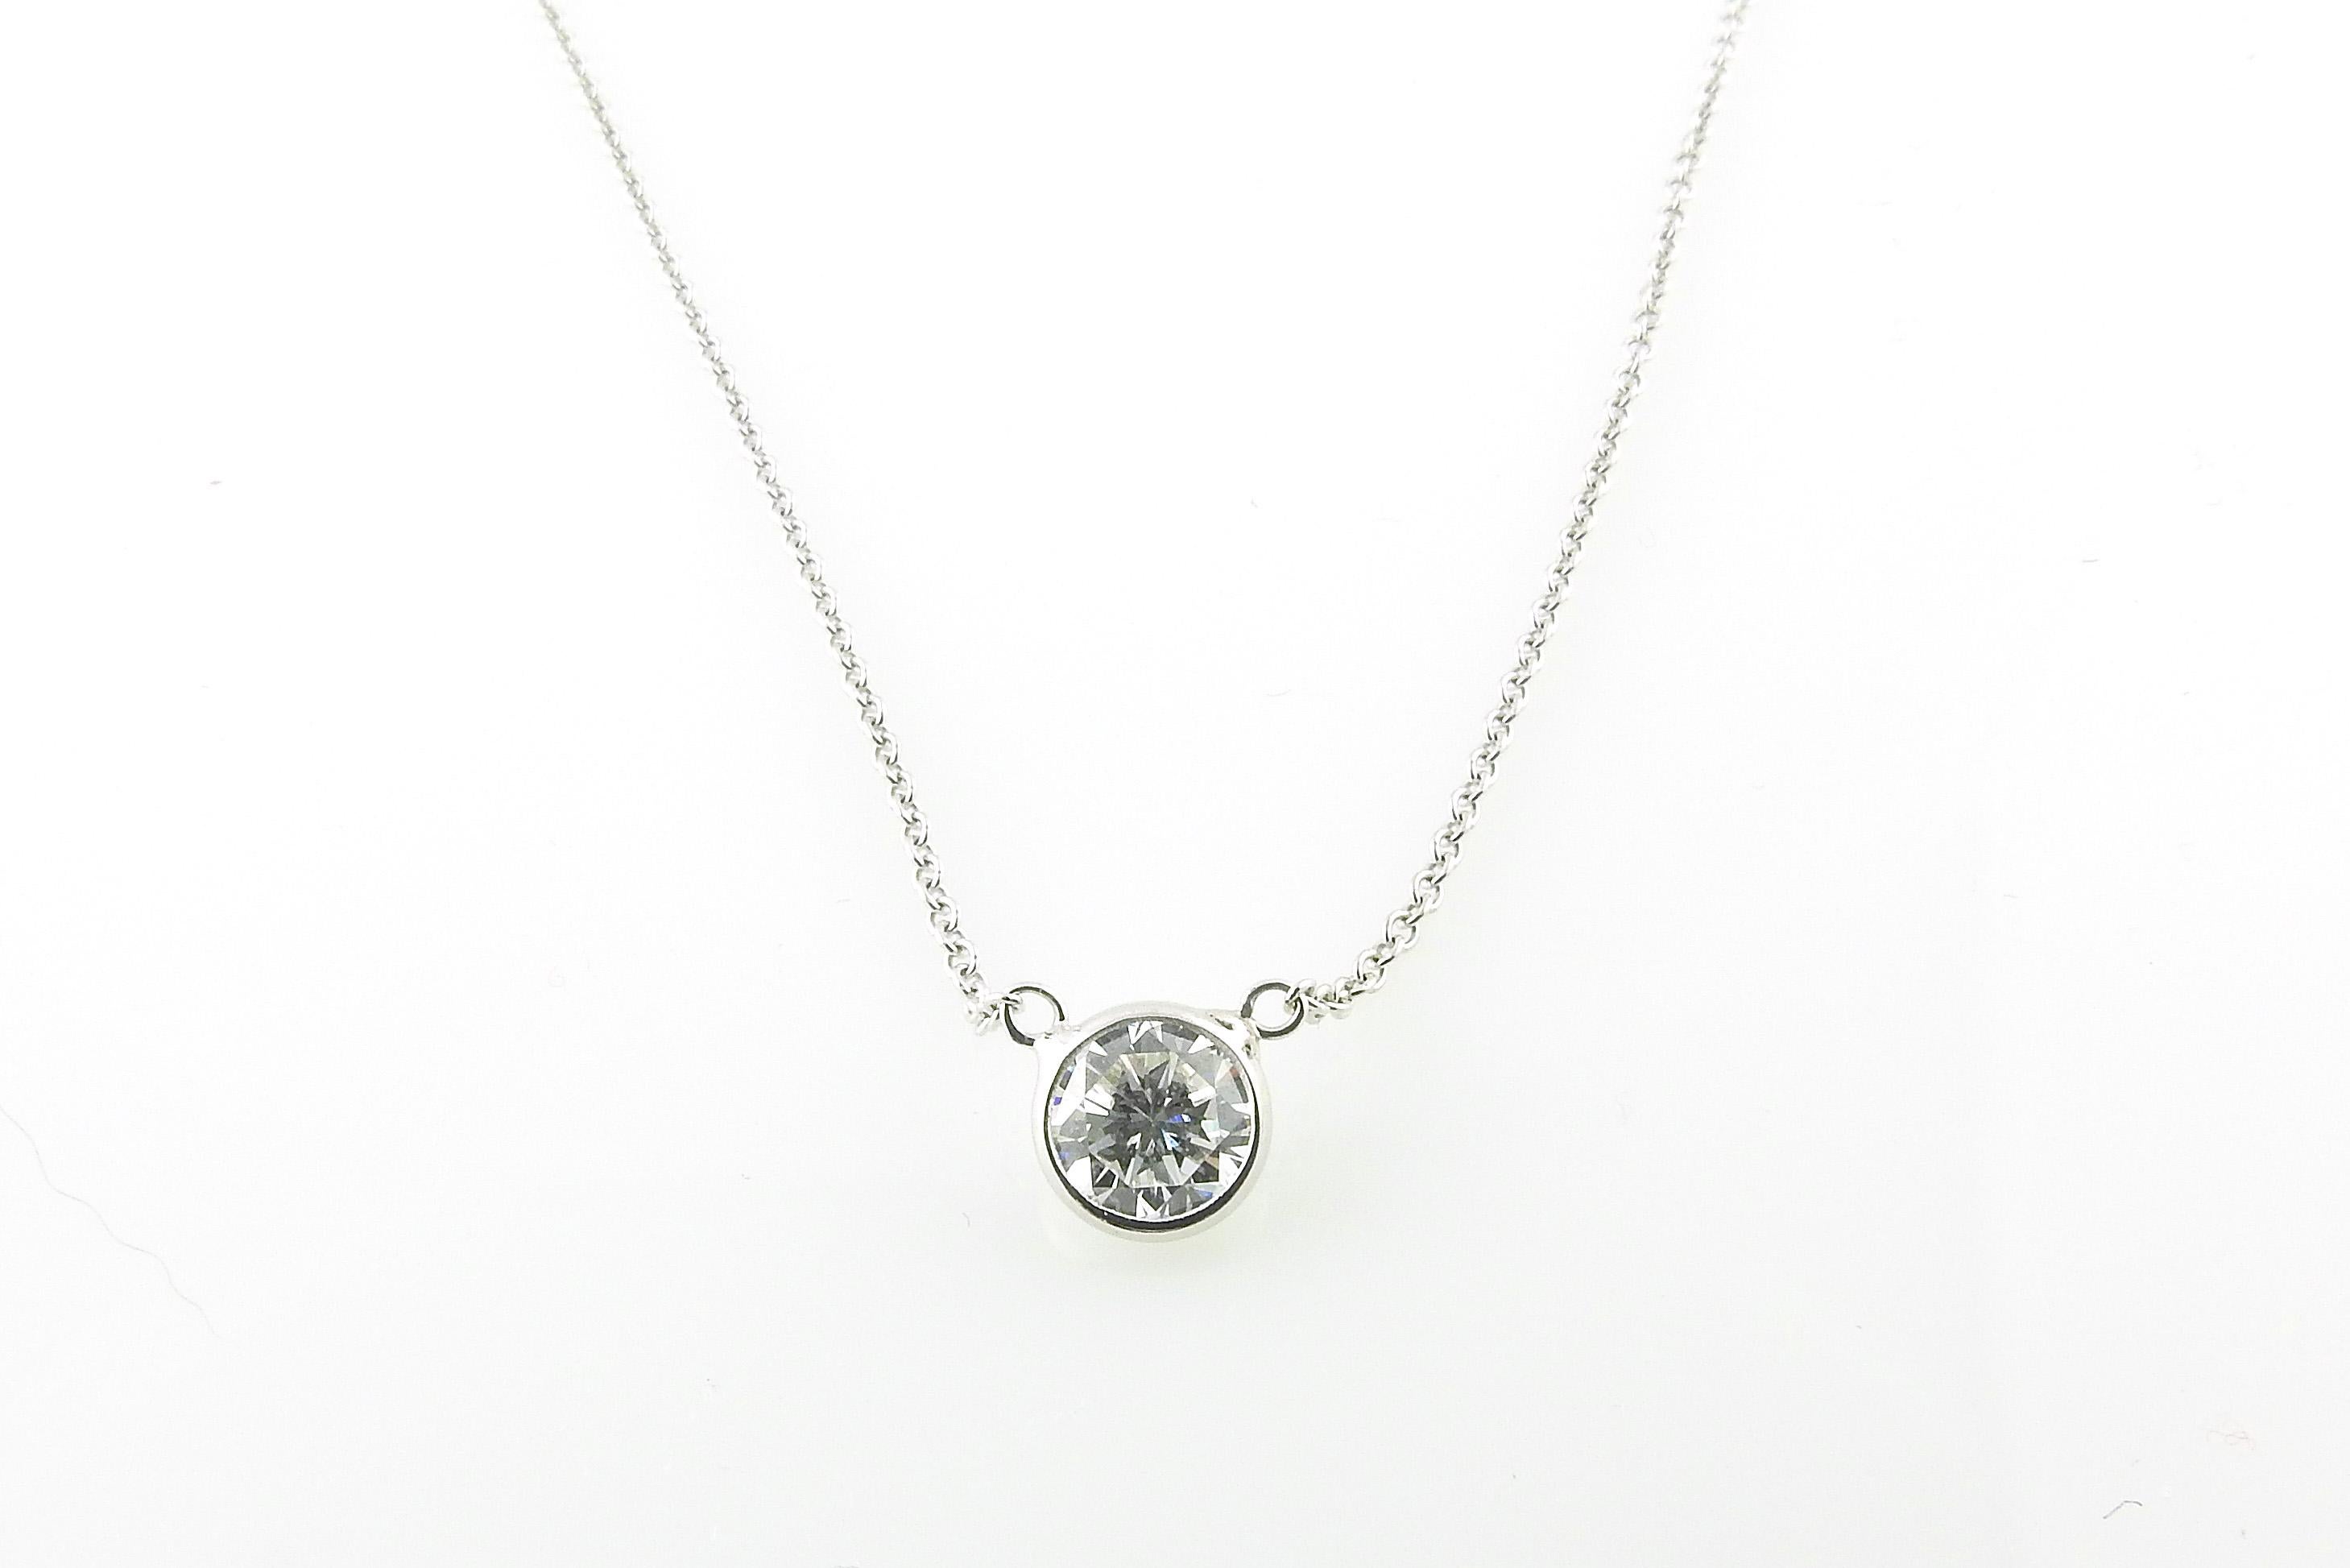 14 Karat White Gold Diamond Solitaire Pendant Necklace GAI Certified-

This sparkling pendant necklace features one round brilliant cut diamond bezel set in classic 14K white gold.

Total diamond weight:  .69 ct.

Diamond color:  F

Diamond clarity: